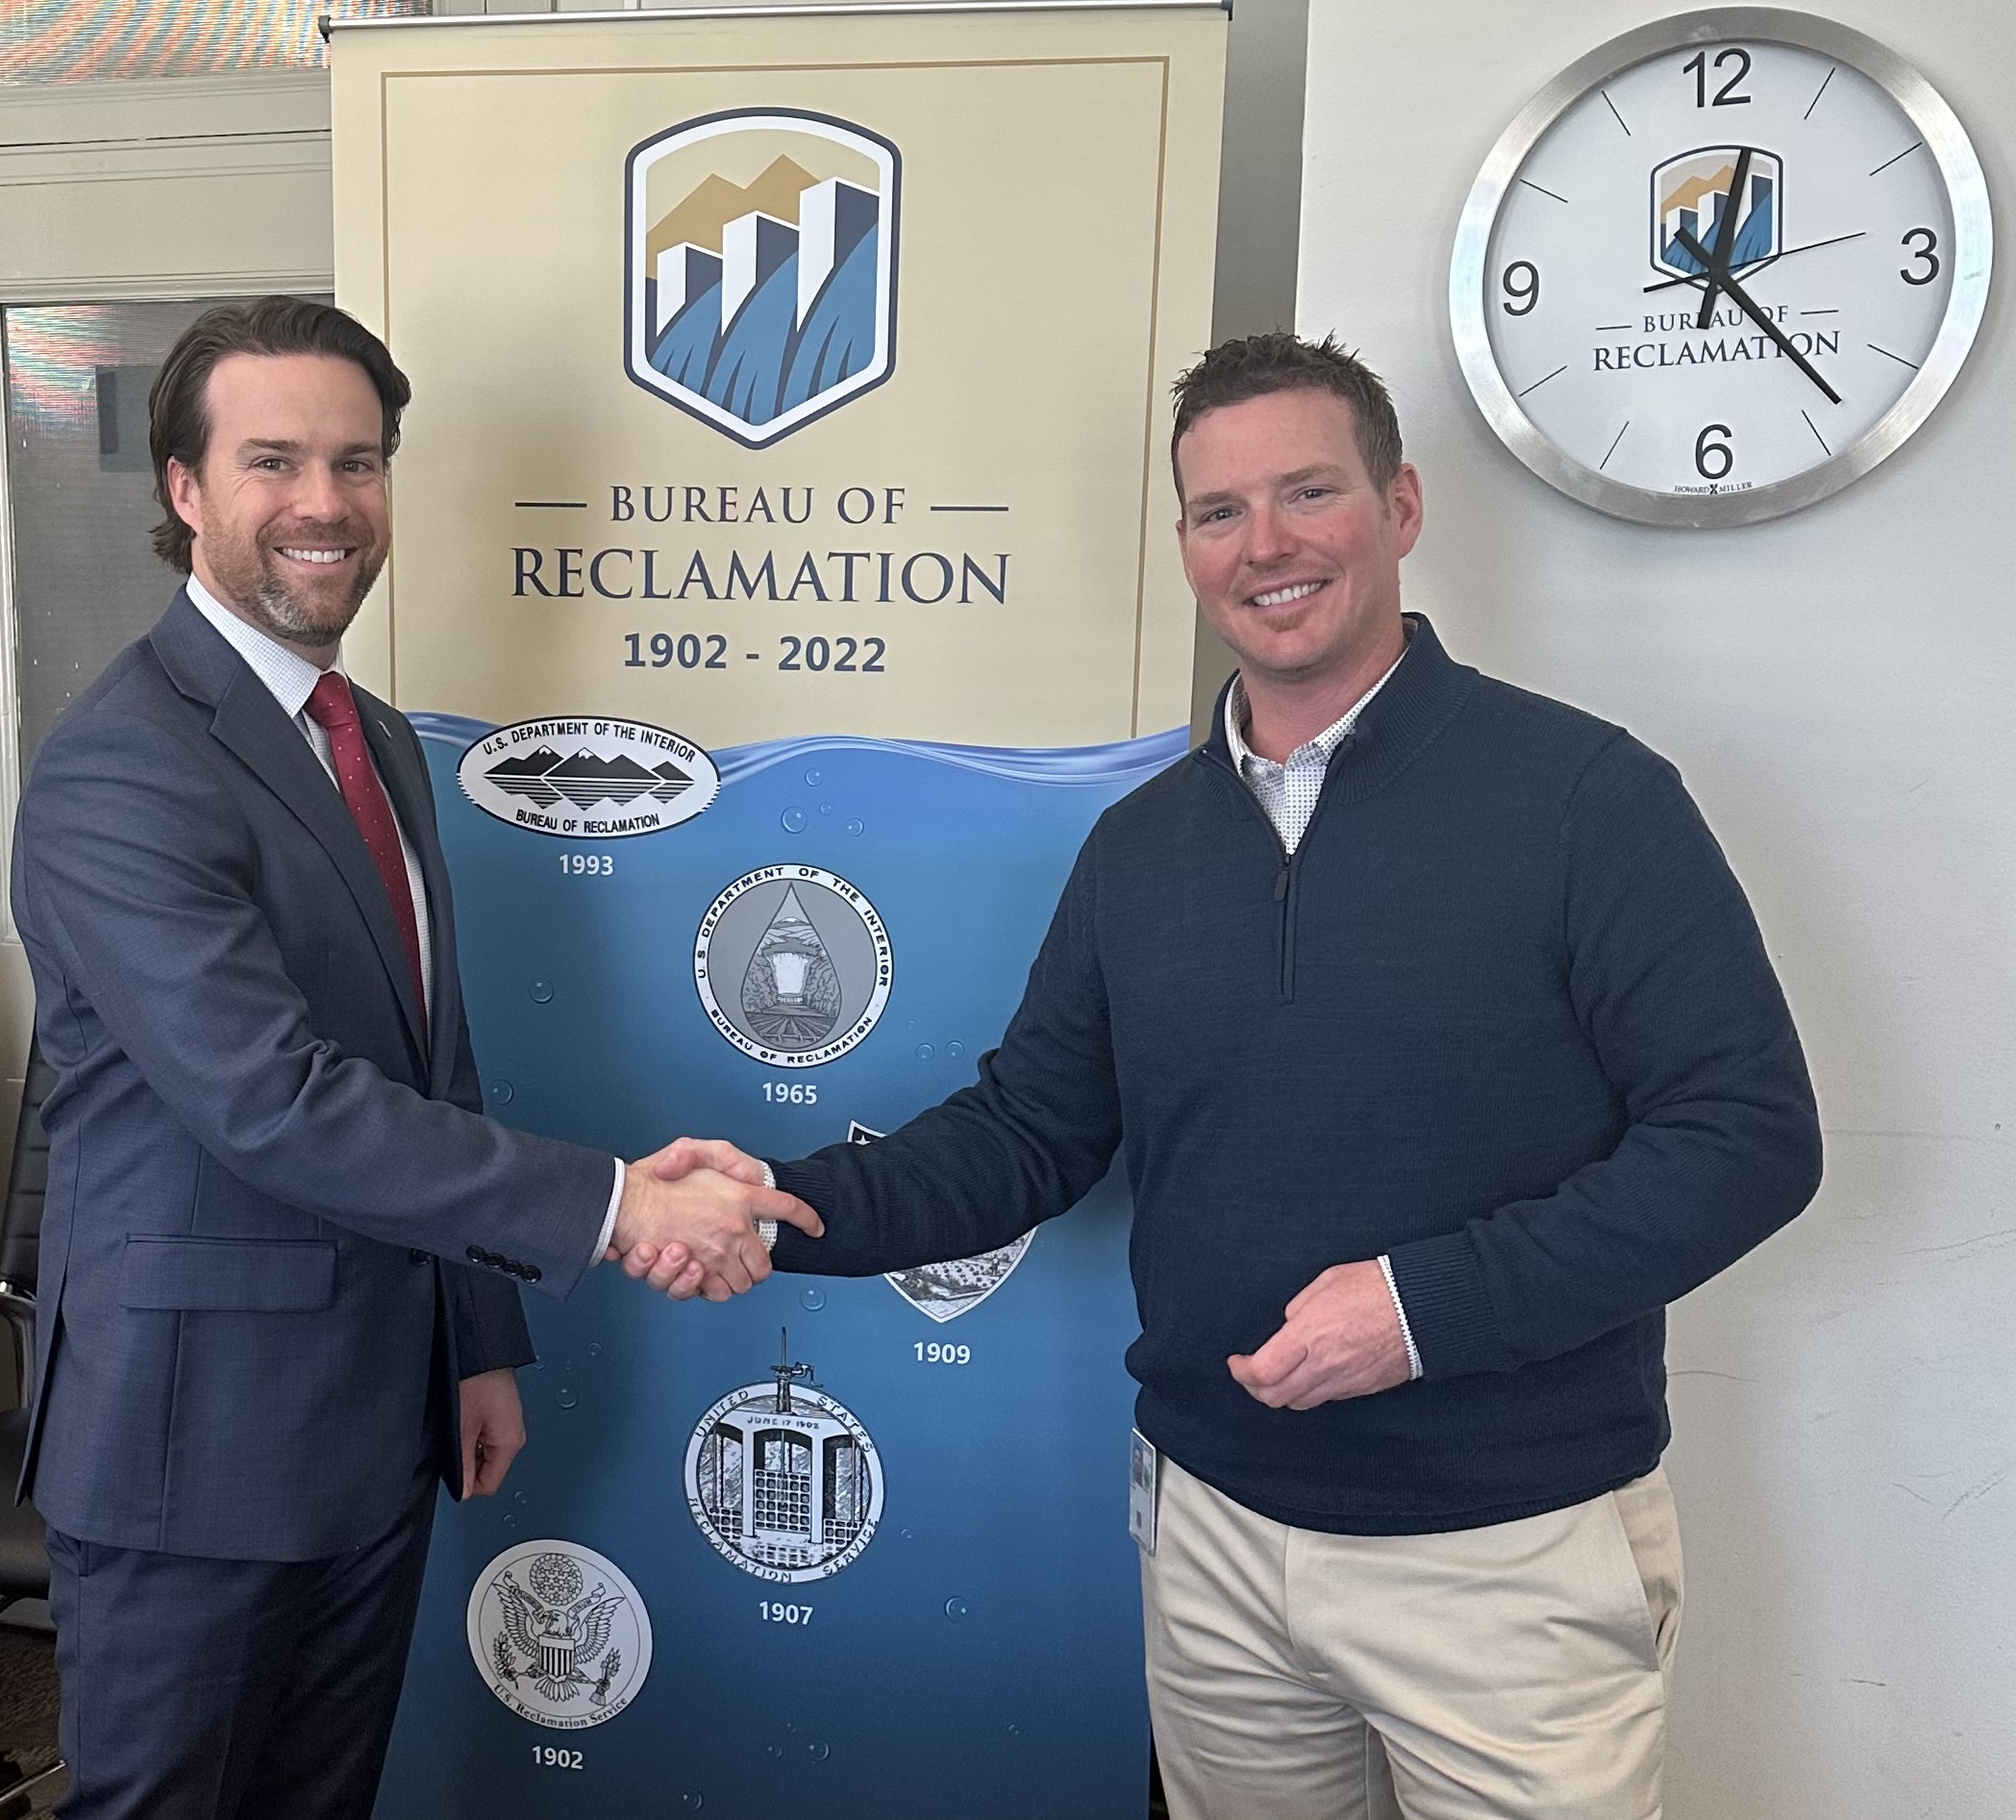 Chad Kidd, P.E., PMP (right) is congratulated by Deputy Commissioner Michael Brain for being selected as the Bureau of Reclamation's Engineer of the Year.